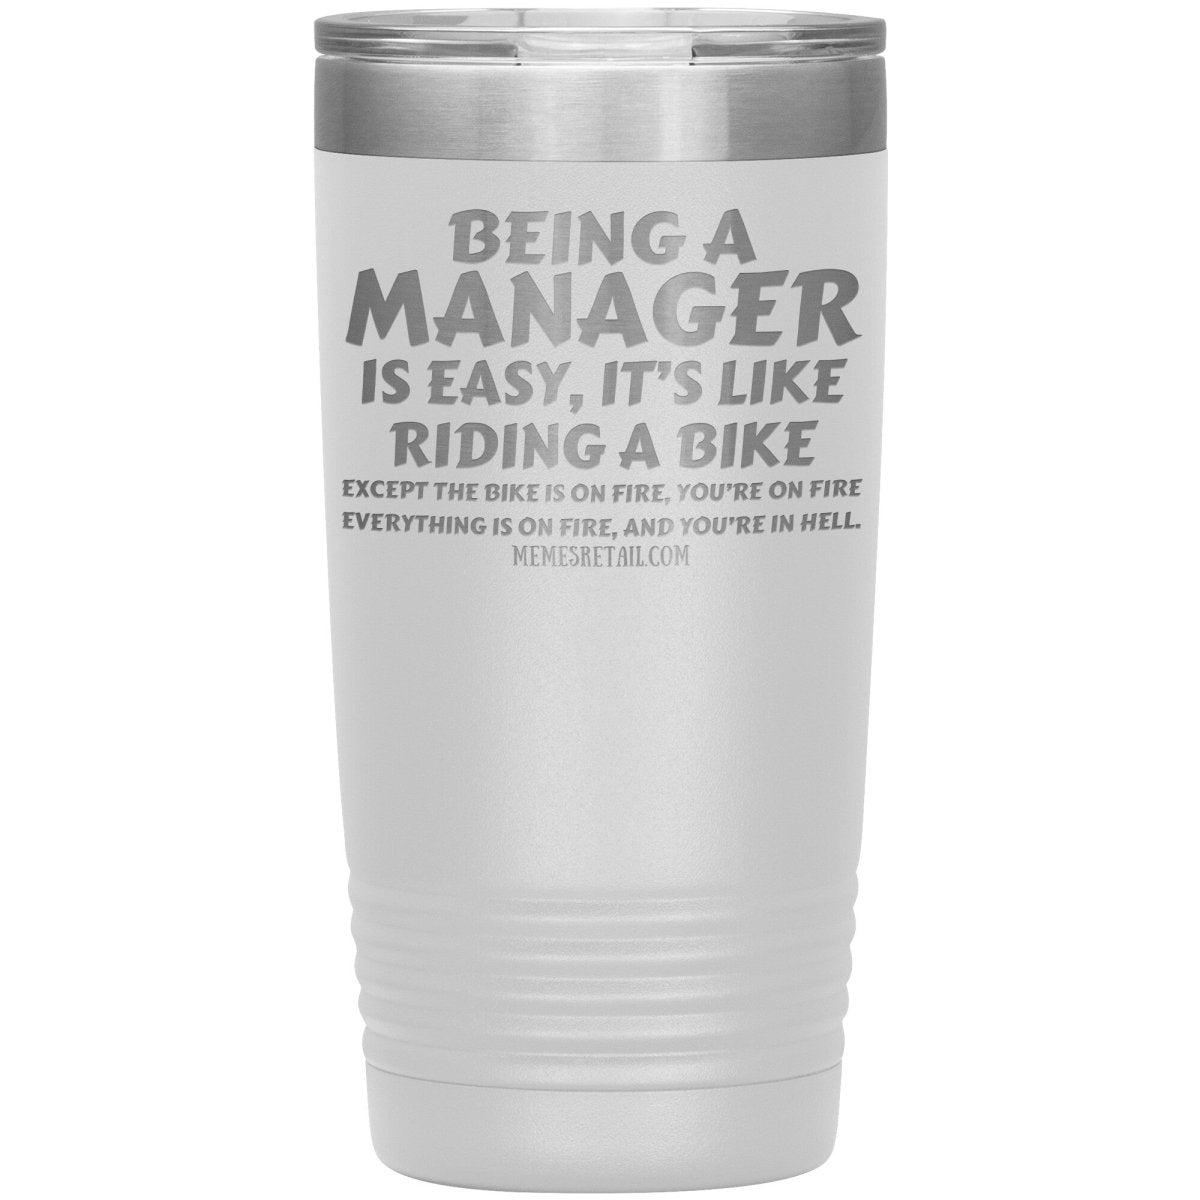 Being a manager is easy Tumblers, 20oz Insulated Tumbler / White - MemesRetail.com